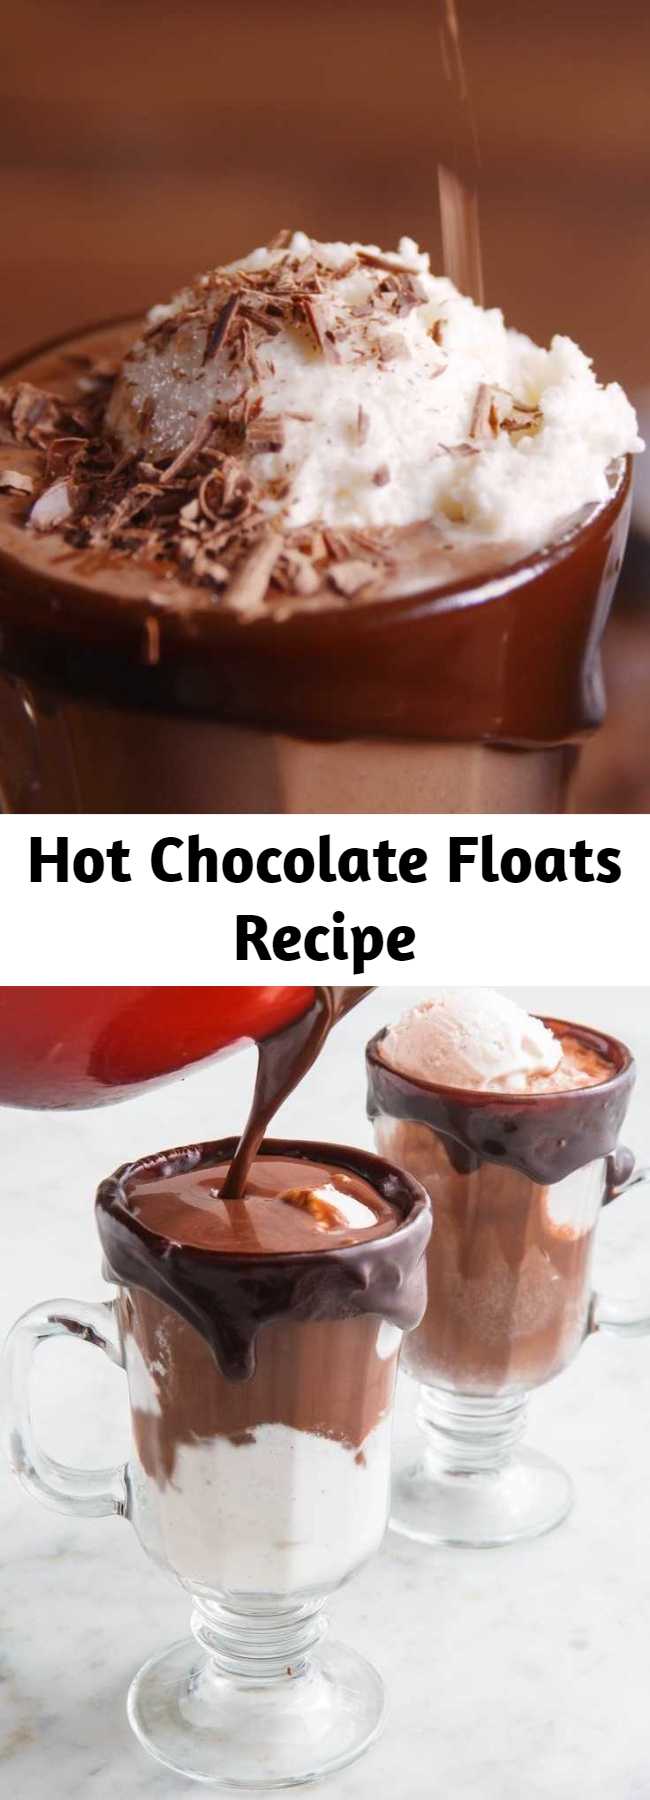 Hot Chocolate Floats Recipe - Homemade hot chocolate is super fudgy and wayyyy more delish than packaged mix. It's also insanely easy to make on the stovetop. Top off each mug with a big scoop of vanilla ice cream and you're in for a dangerously decadent treat. #easy #recipe #cocoa #hot #chocolate #icecream #floats #winter #desserts